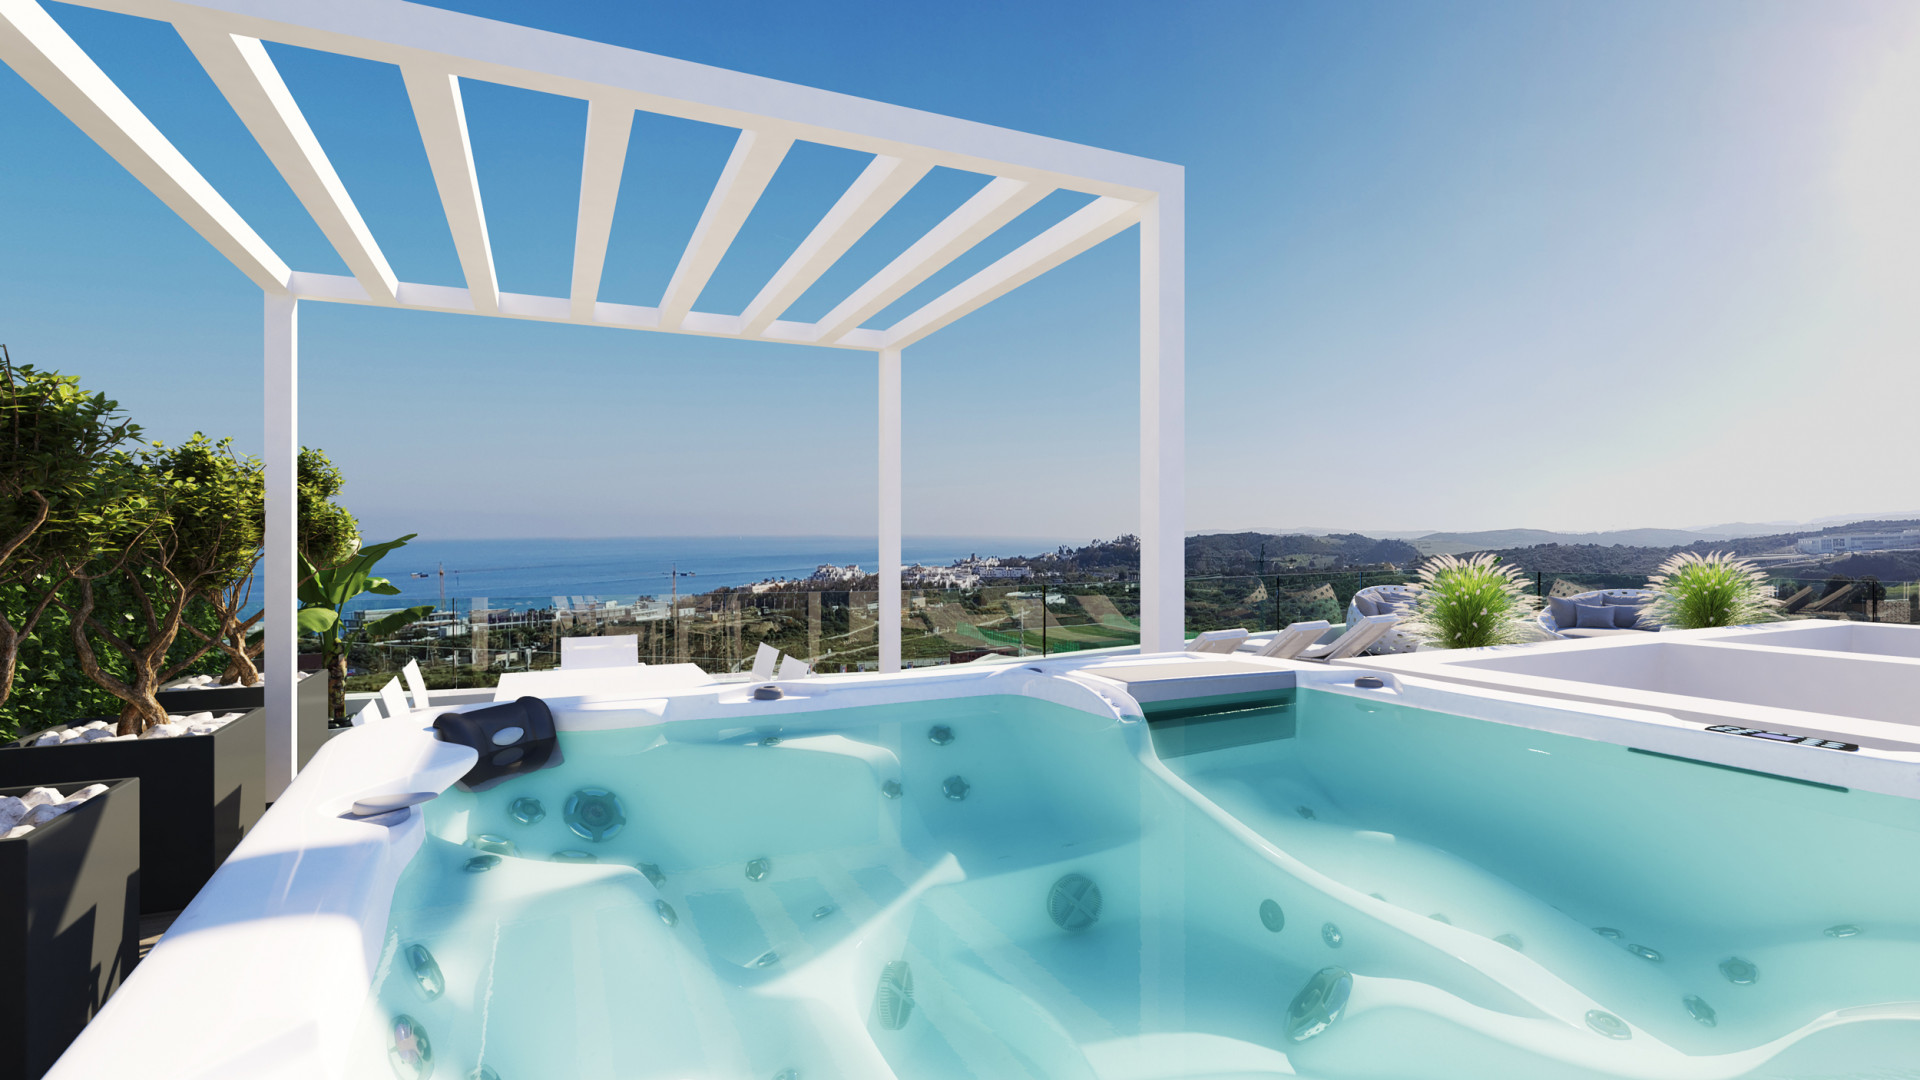 Spectacular seaviews from these new terraceapartments in Estepona.PL148